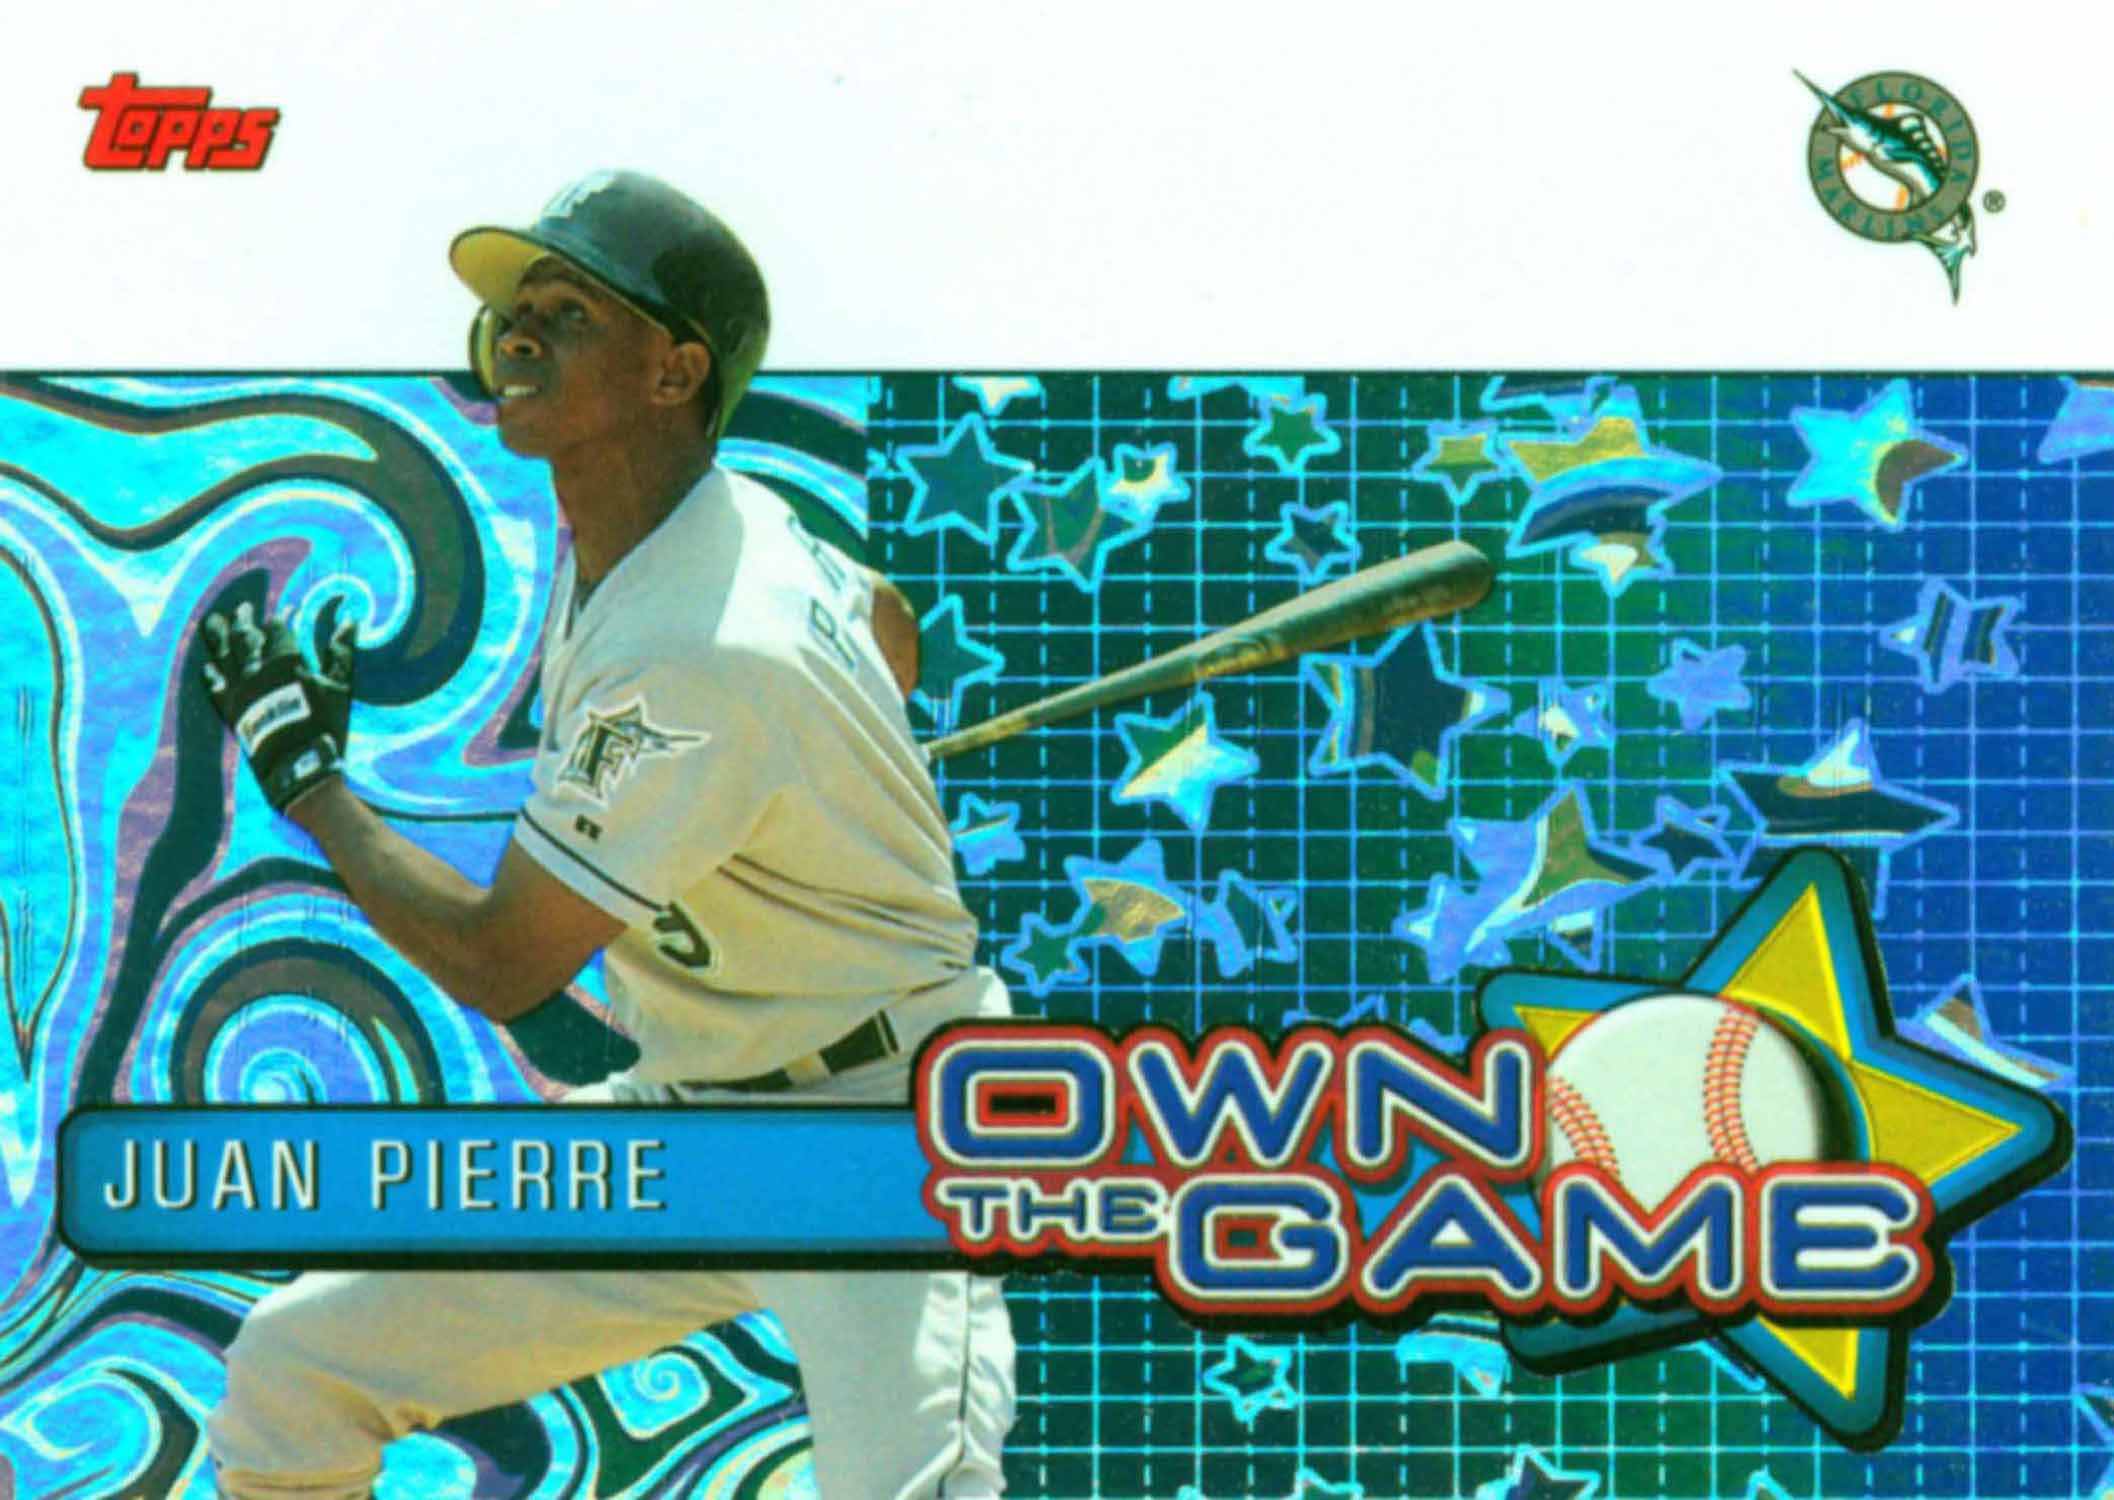 2005 Topps Own the Game